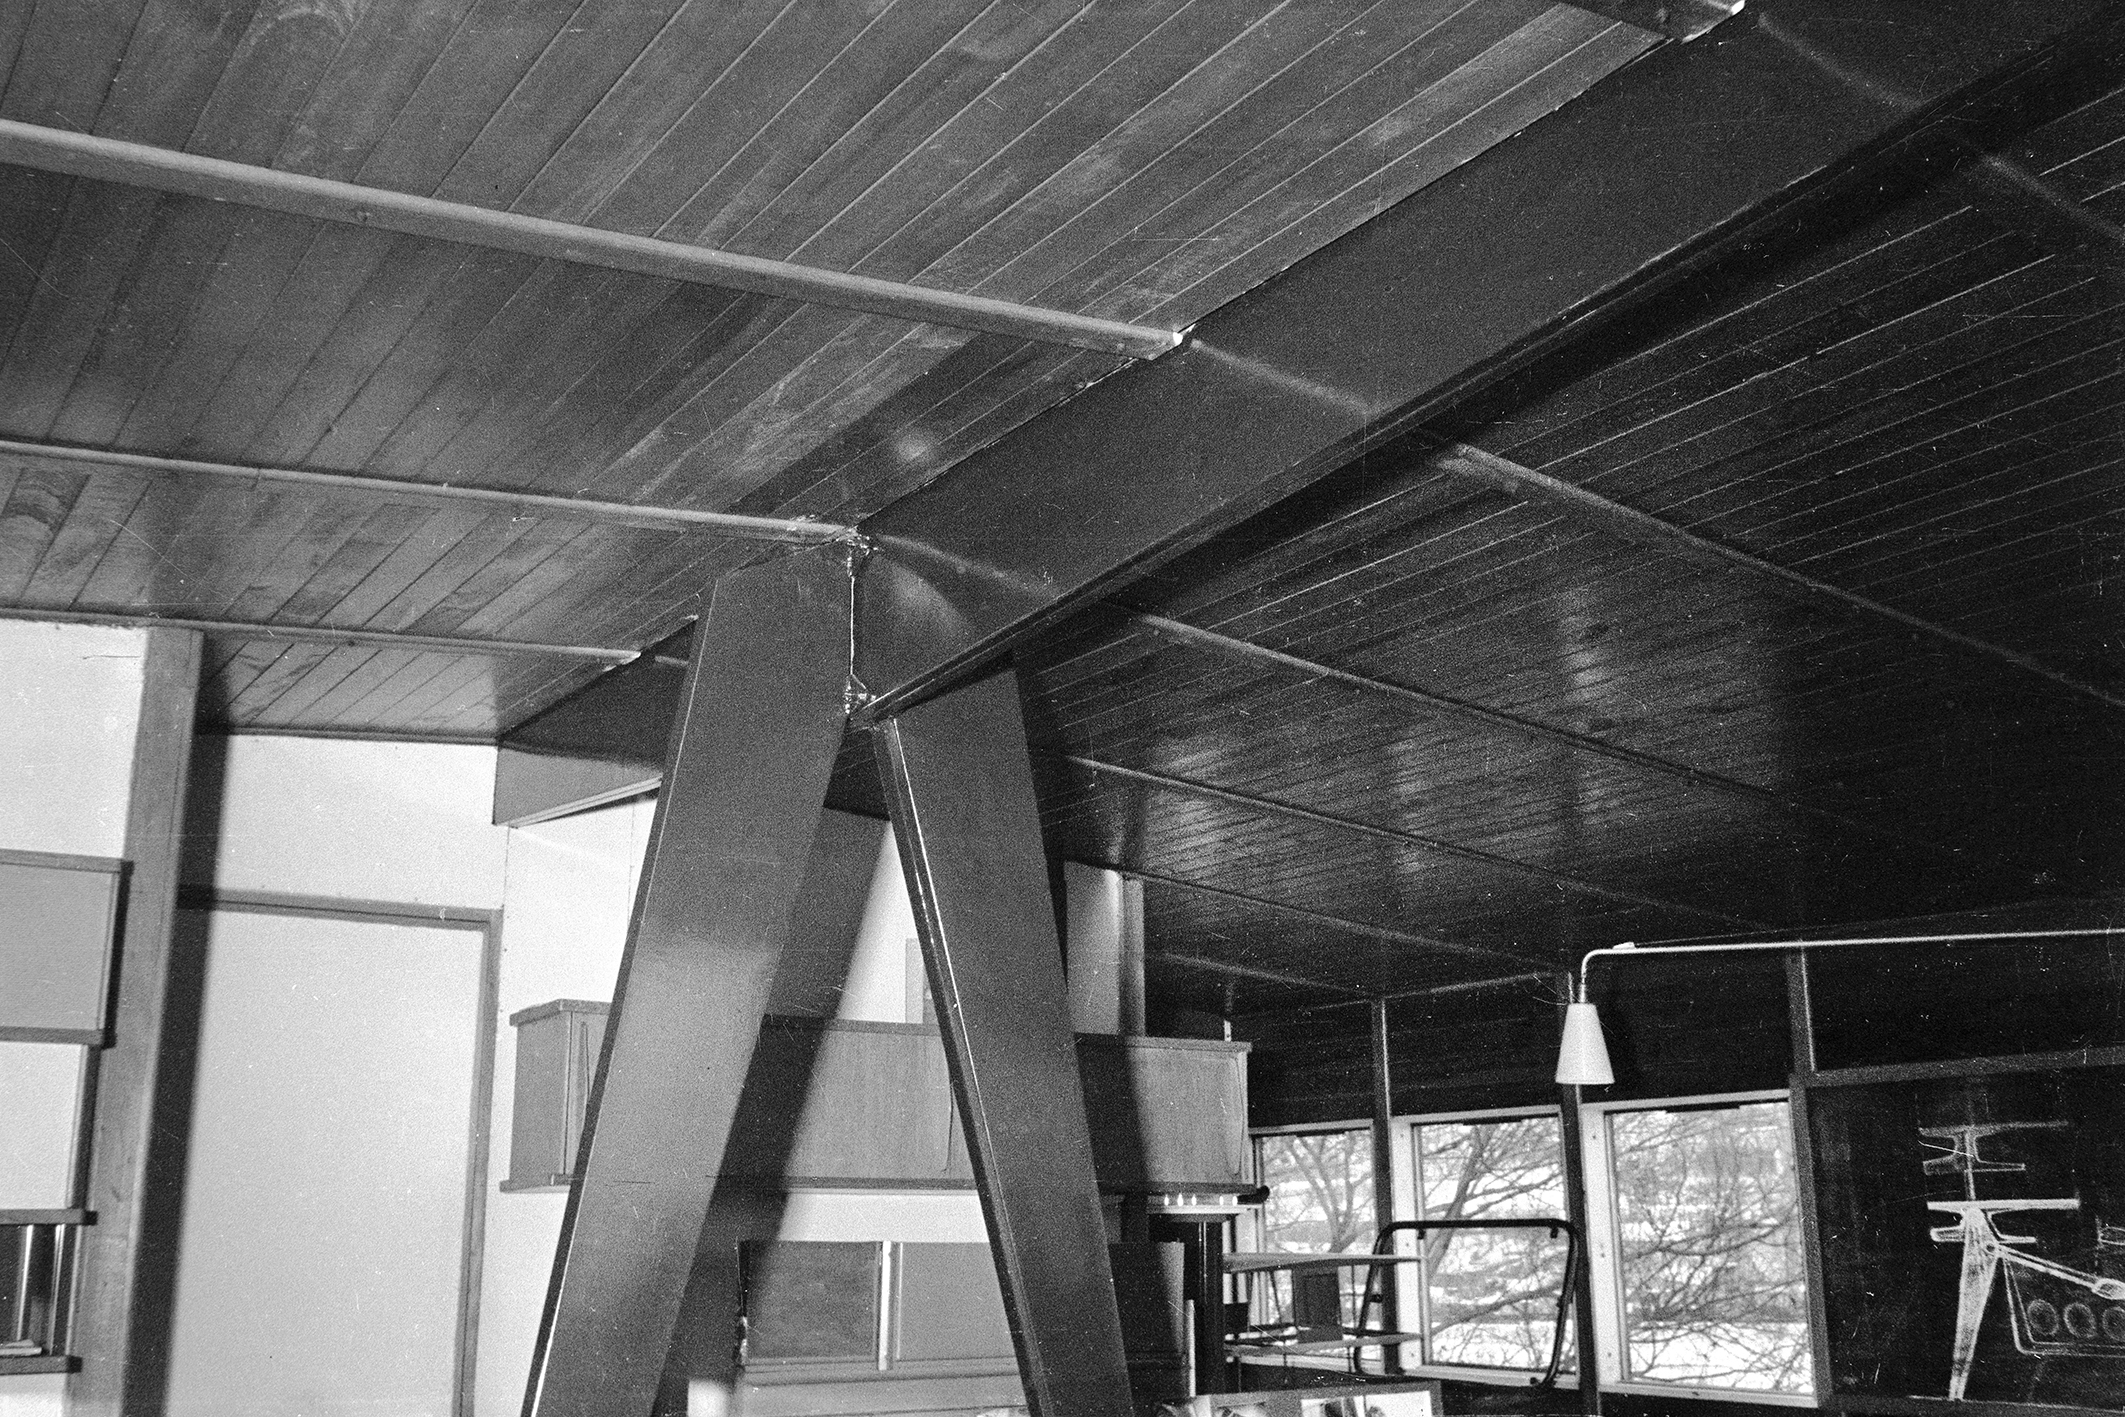 8x8 Demountable house, Jean Prouvé’s office, Maxéville, ca. 1950. Detail of the inverted-V interior portal frame.